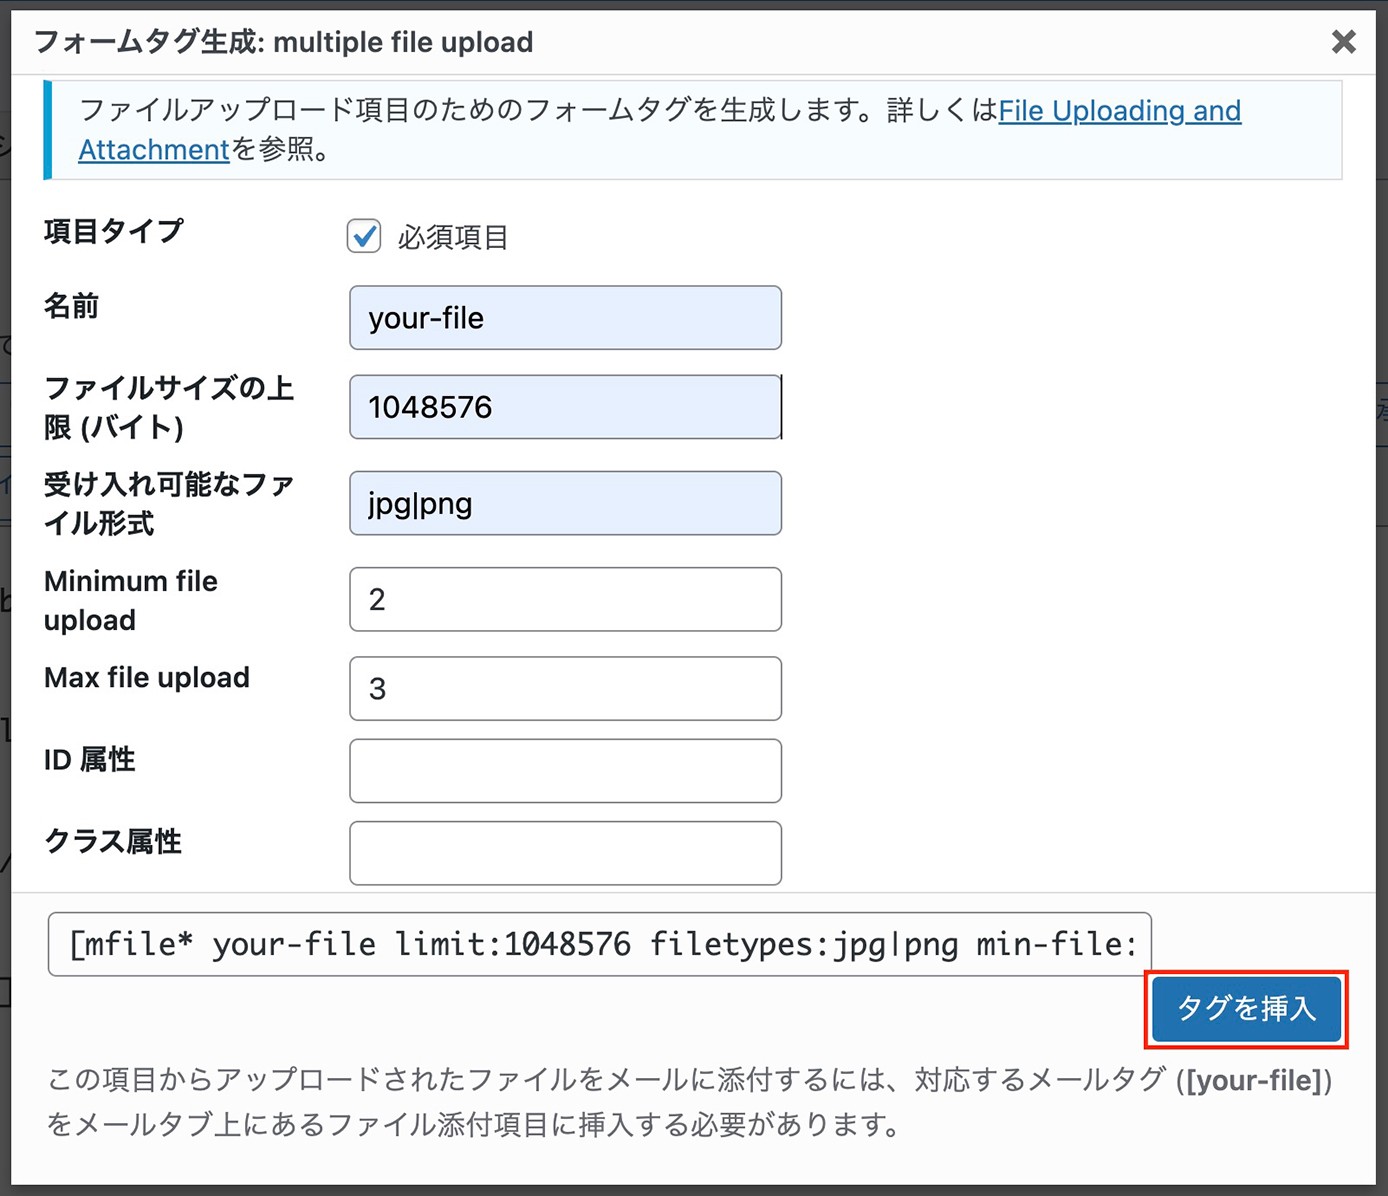 Contact From 7：multiple file uploadフォーム作成画面